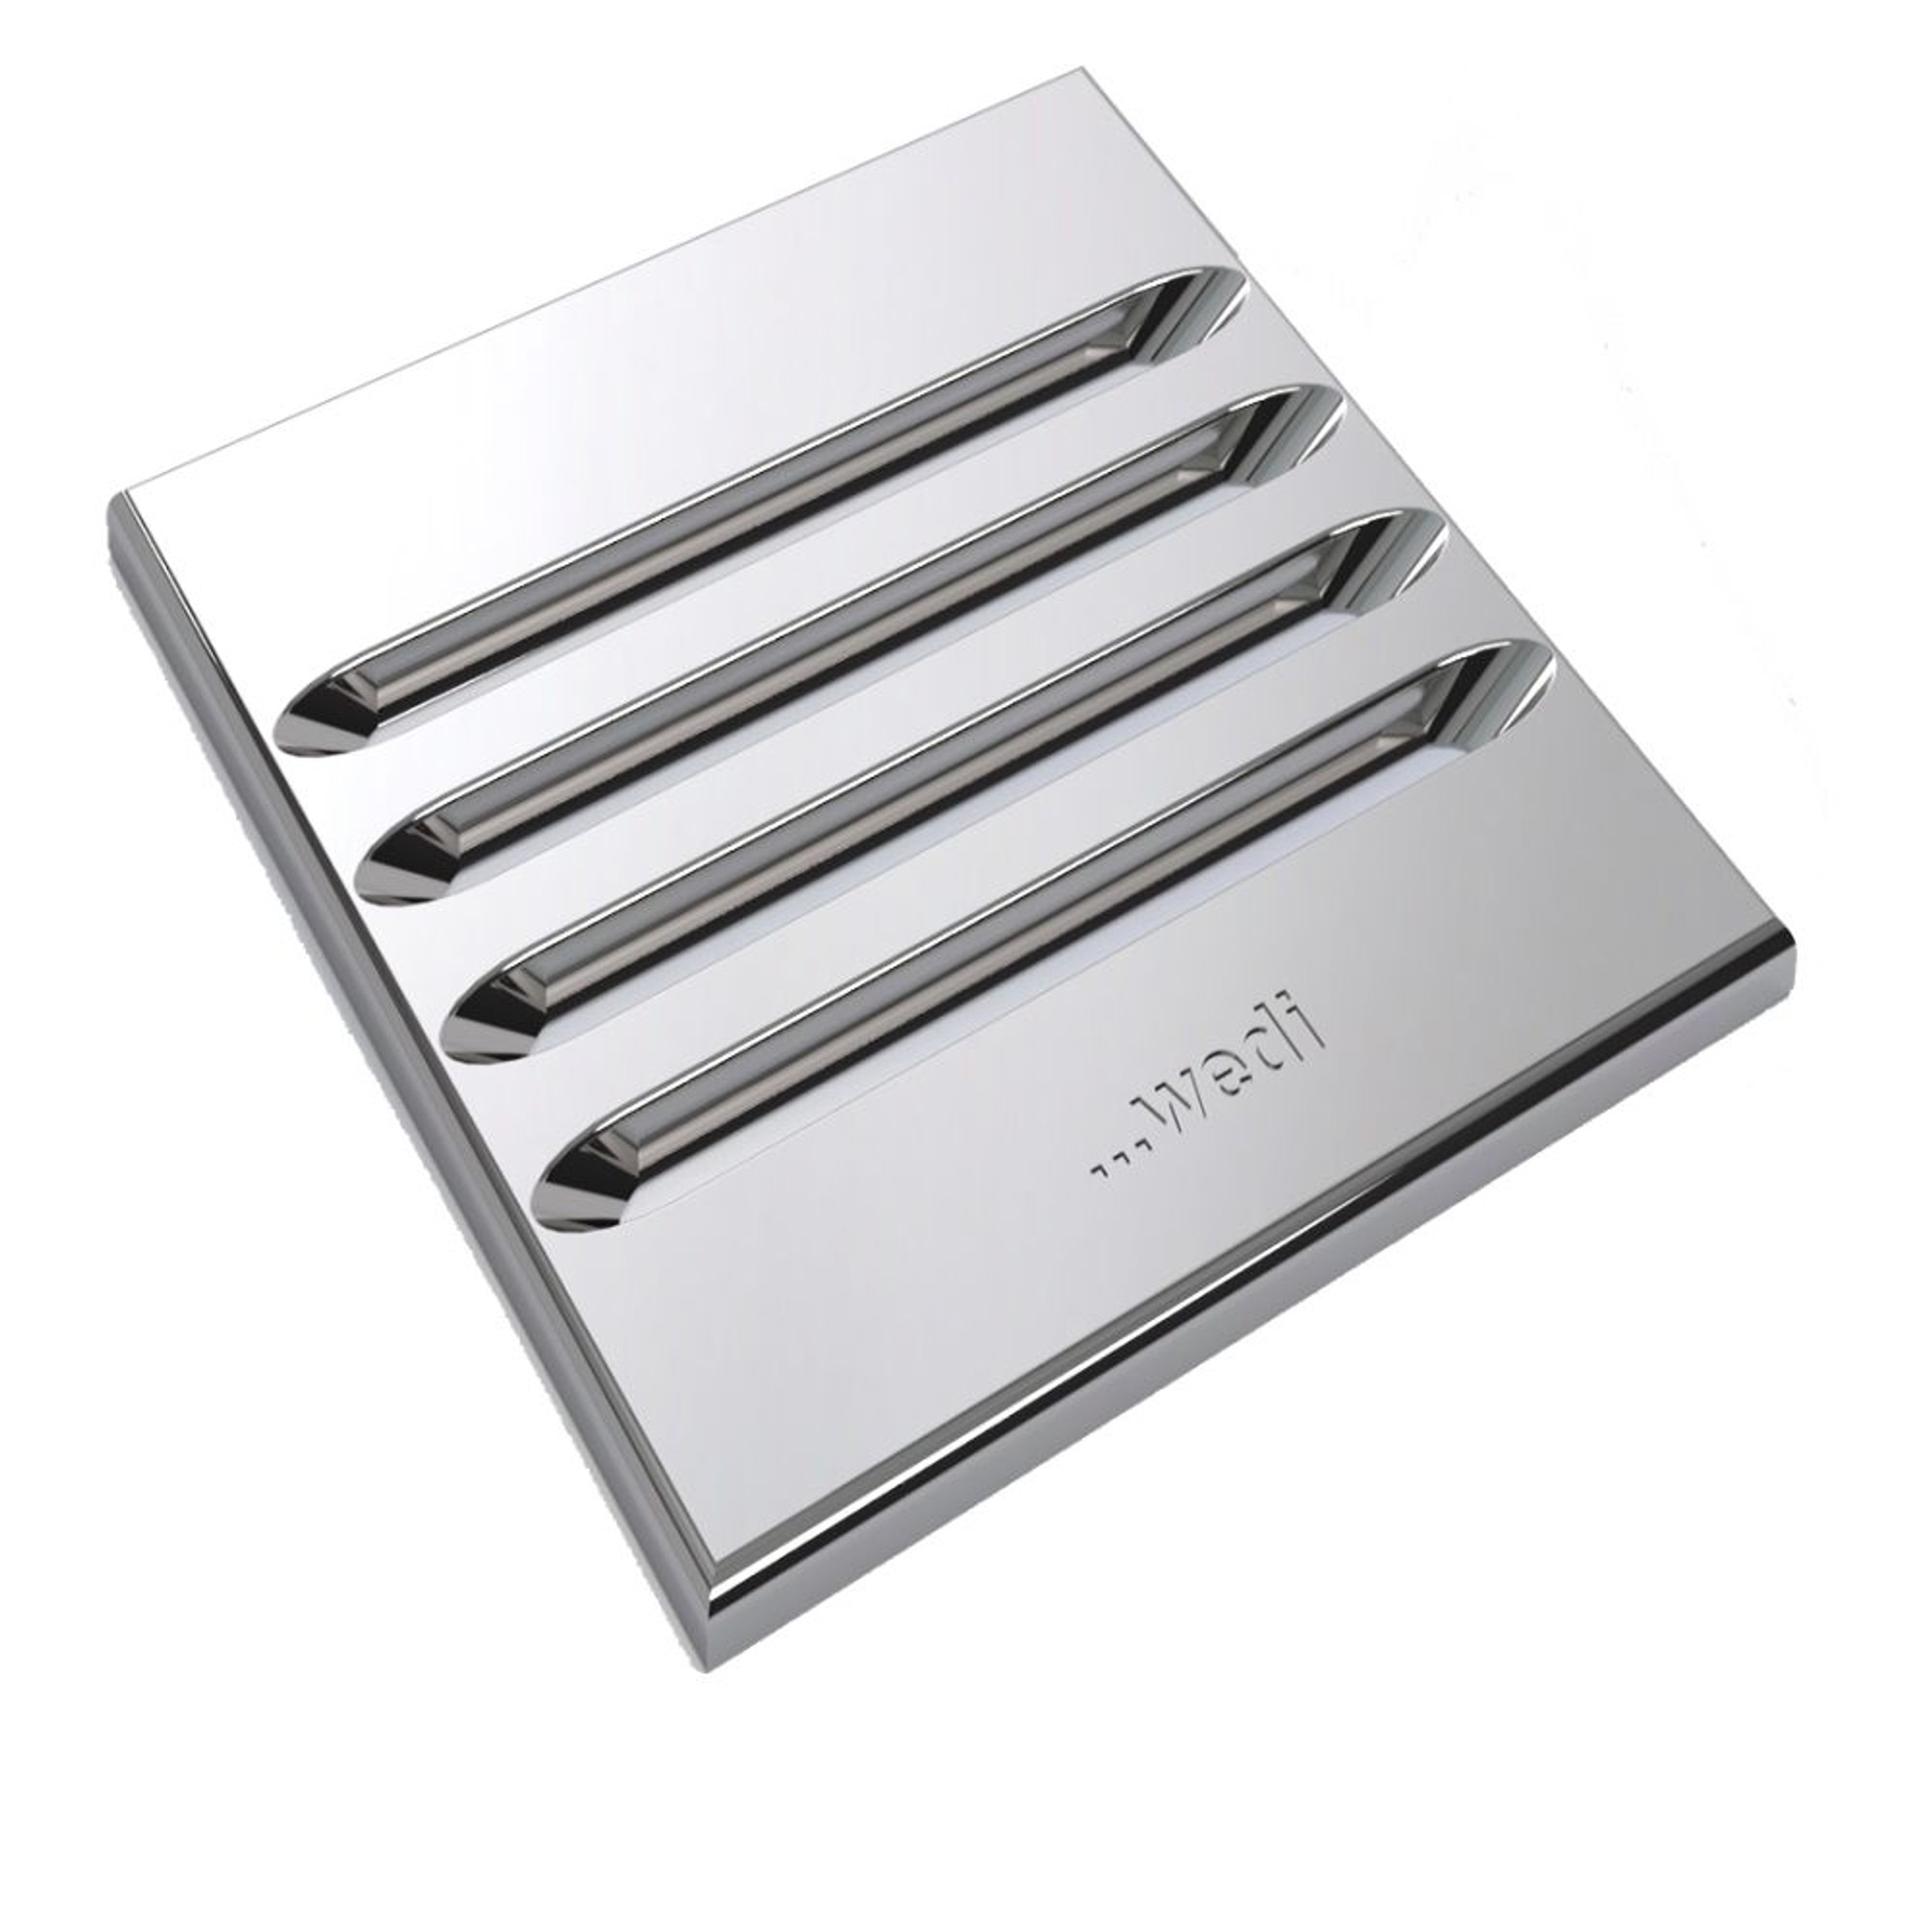 https://cdn11.bigcommerce.com/s-z2oh6/images/stencil/2500x2500/products/15385/17927/Wedi_Fundo_Slotted_Design_Stainless_Steel_Cover_Set_4__59837.1682791290.jpg?c=2